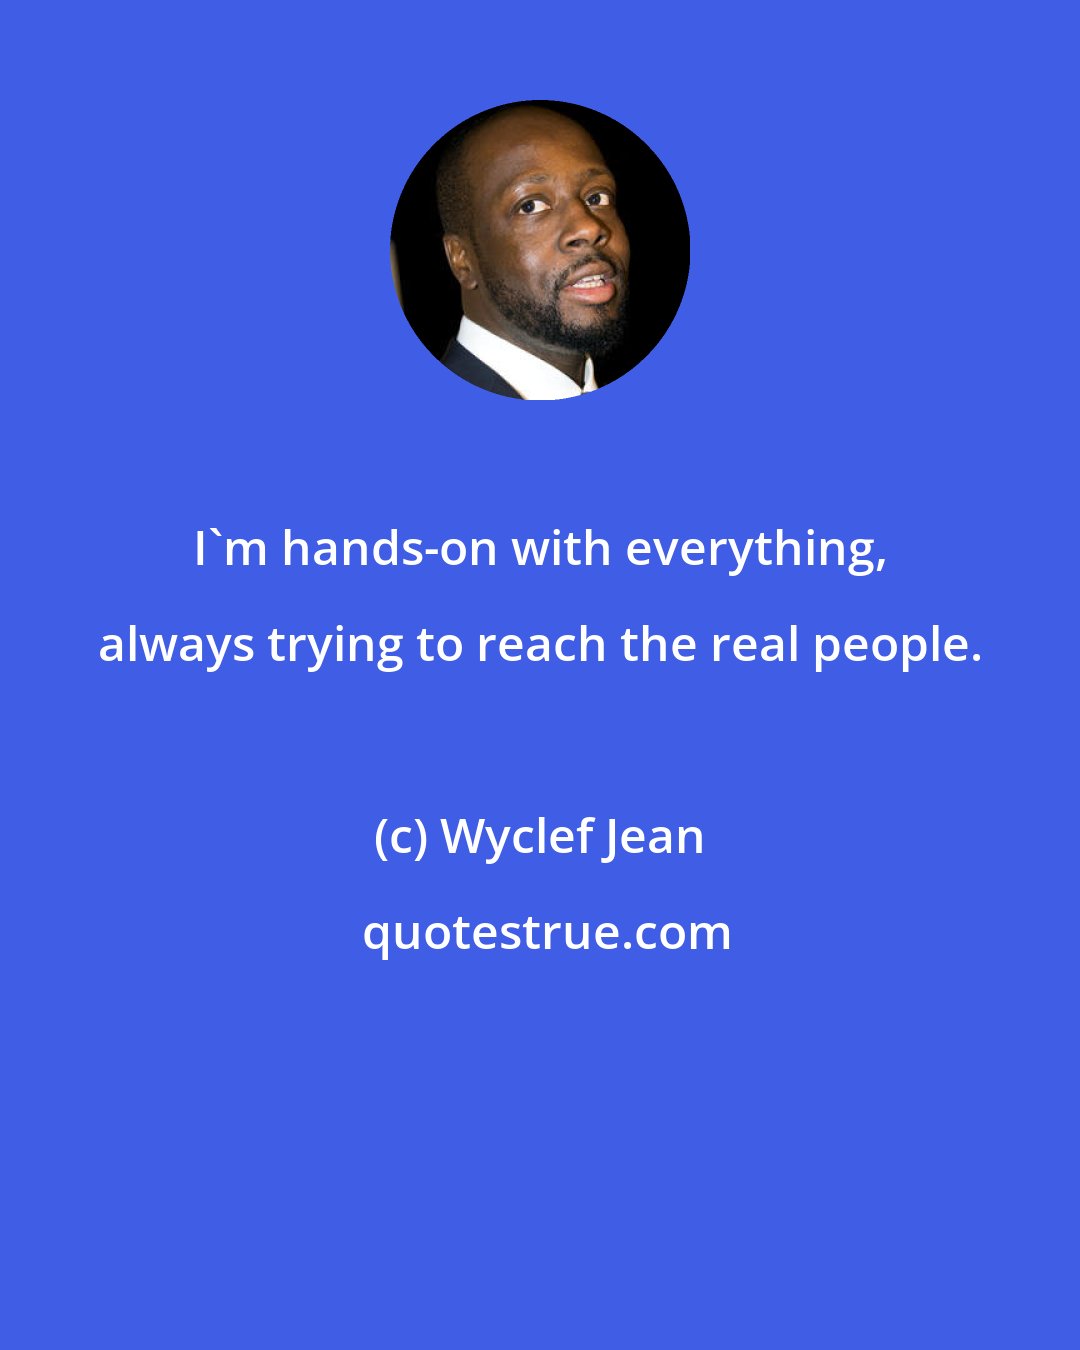 Wyclef Jean: I'm hands-on with everything, always trying to reach the real people.